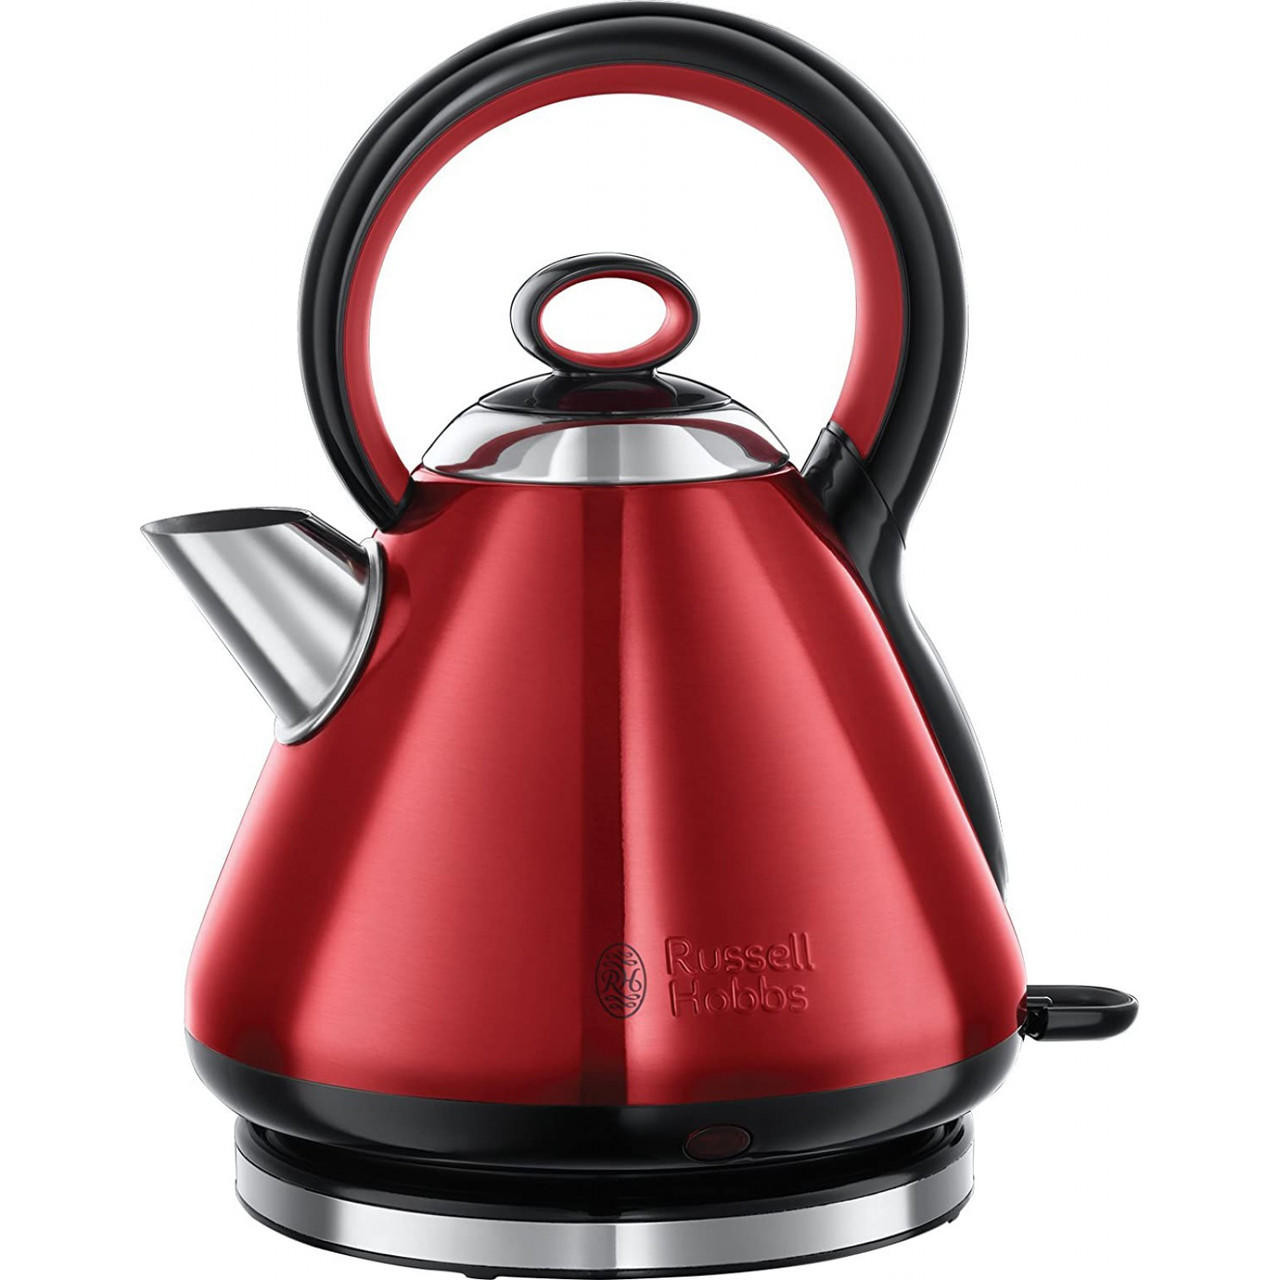 Meet the dynamic duo: Russell Hobbs Kettle and Iron! Add a touch